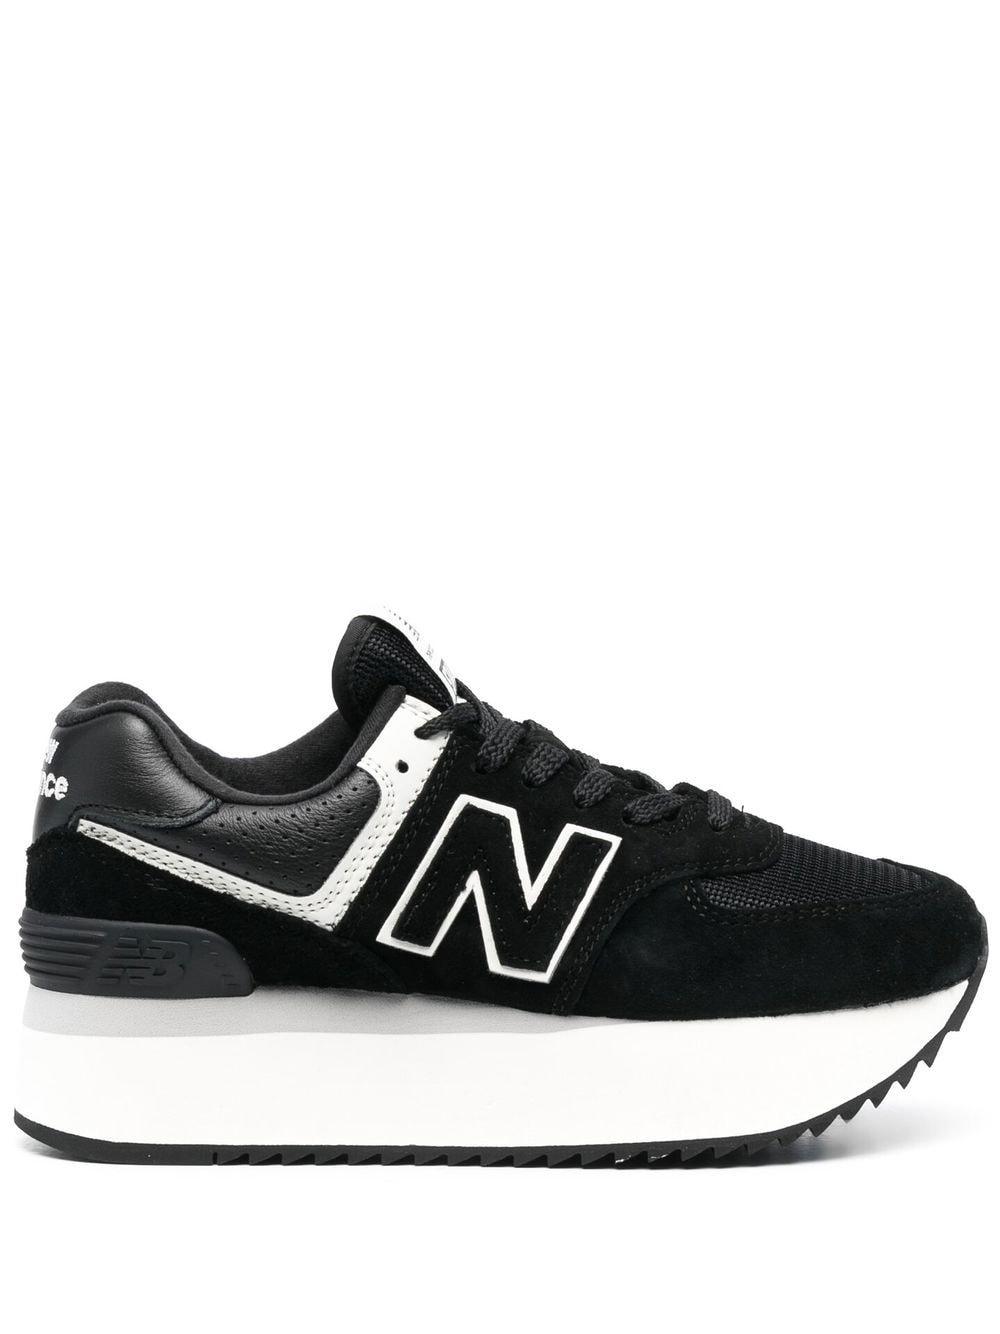 New Balance Wl574zab Lace-up Sneakers in Black | Lyst UK